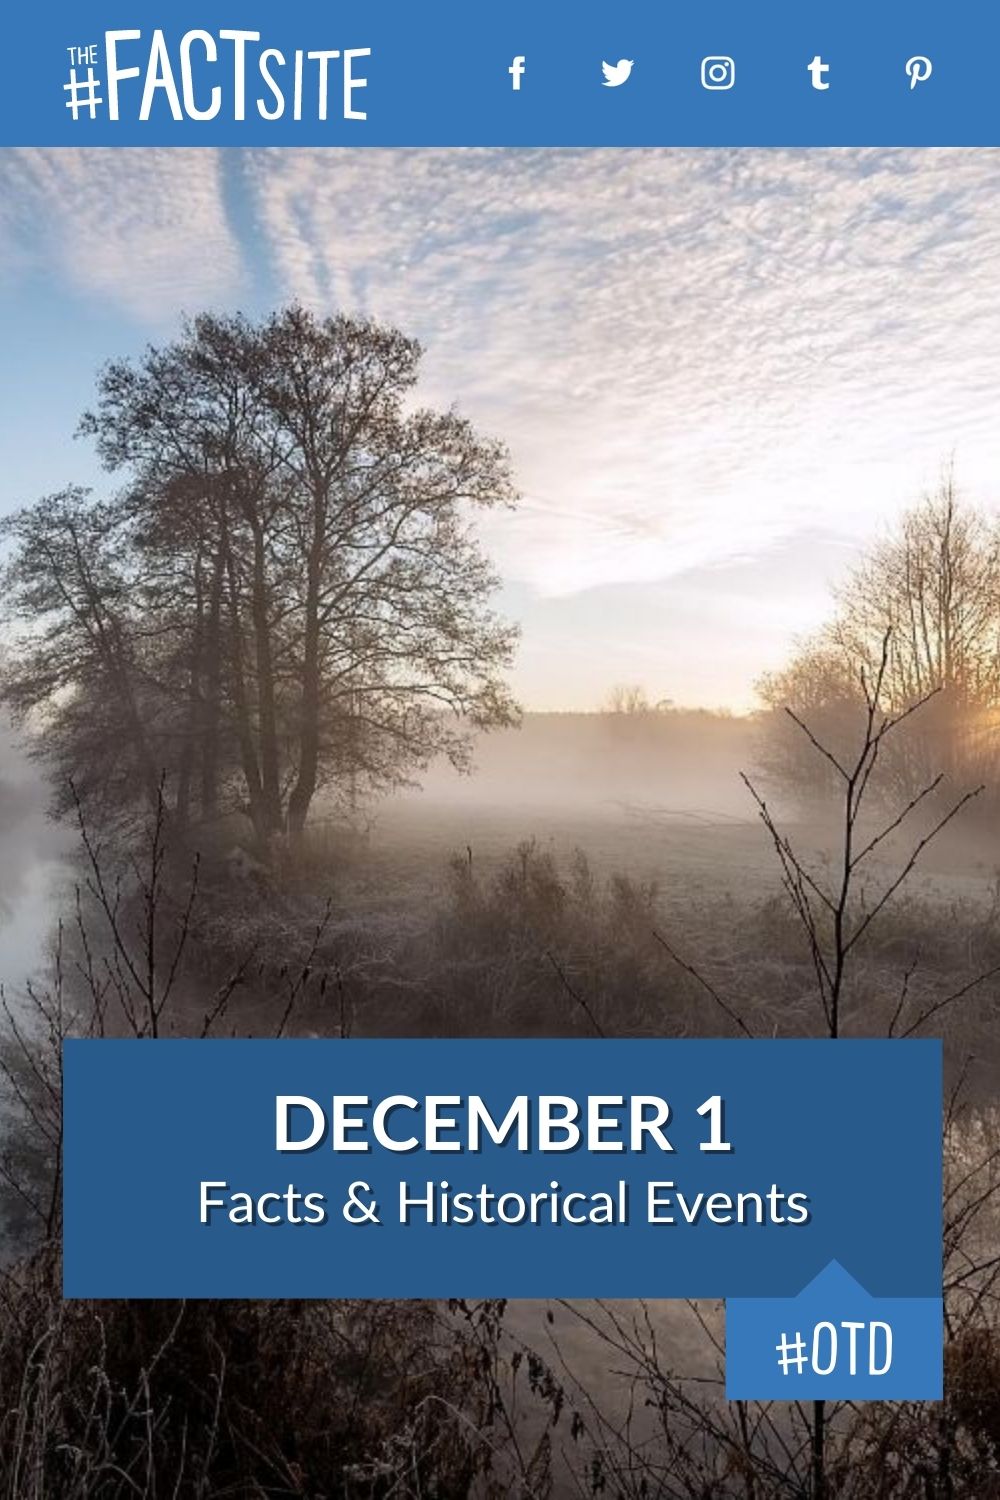 Facts & Historic Events That Happened on December 1